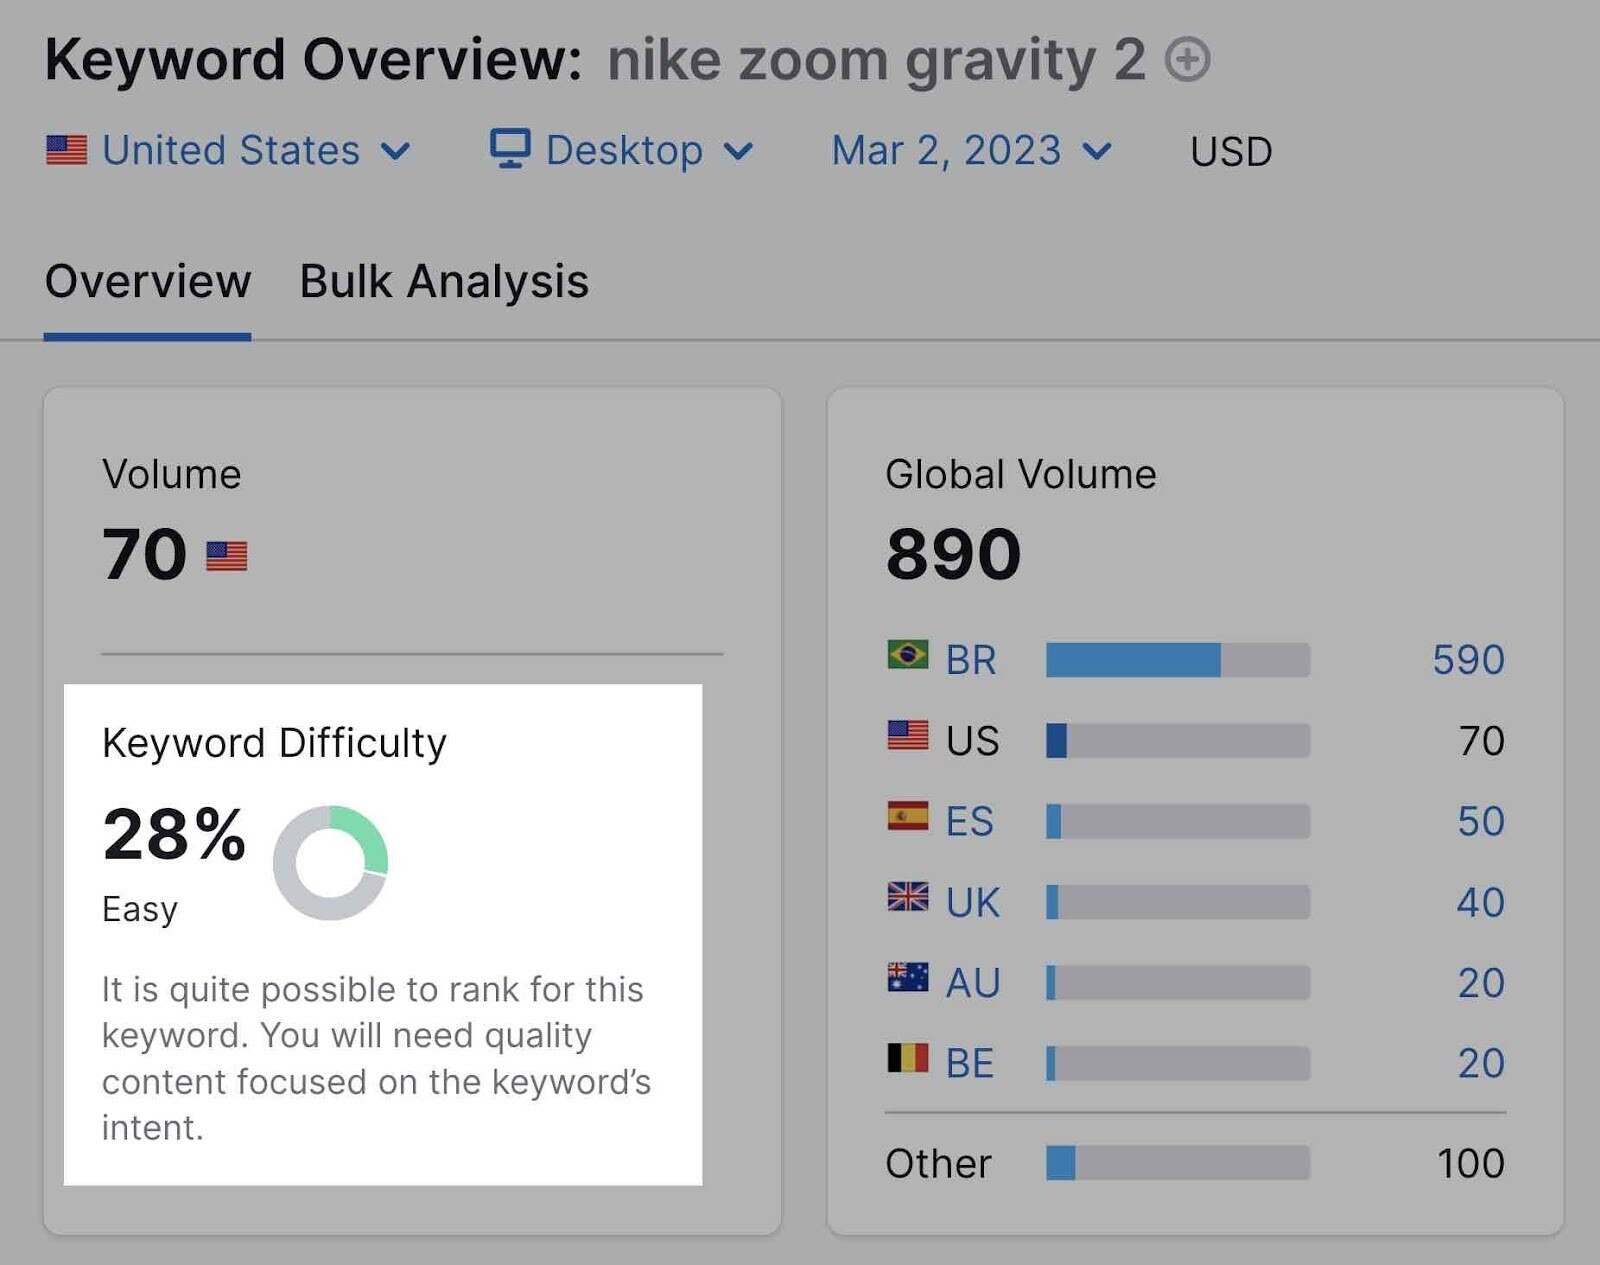 nike zoom gravity 2 in Keyword Overview